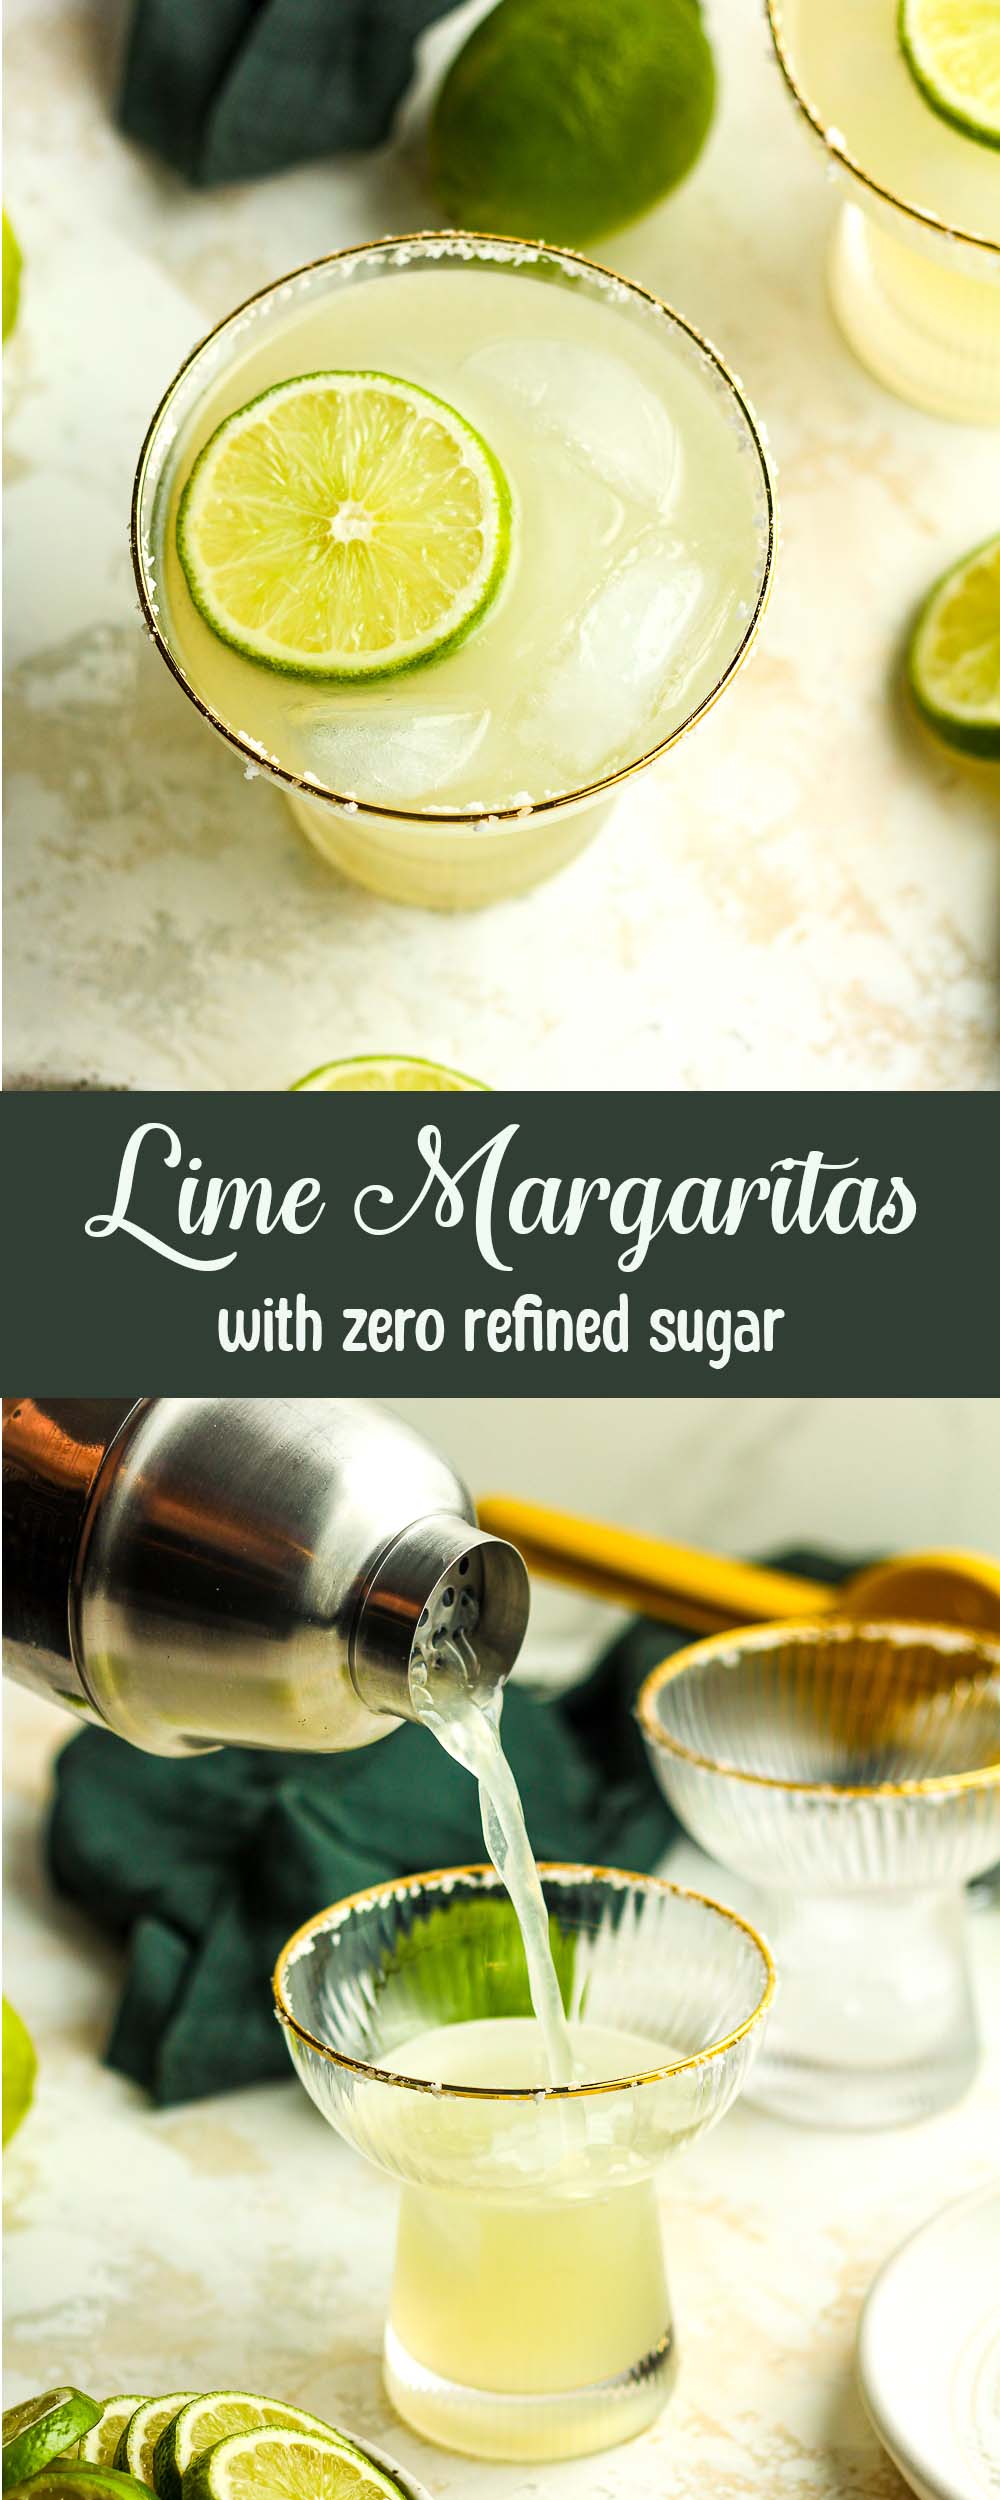 A collage of photos of lime margaritas with zero refined sugar.